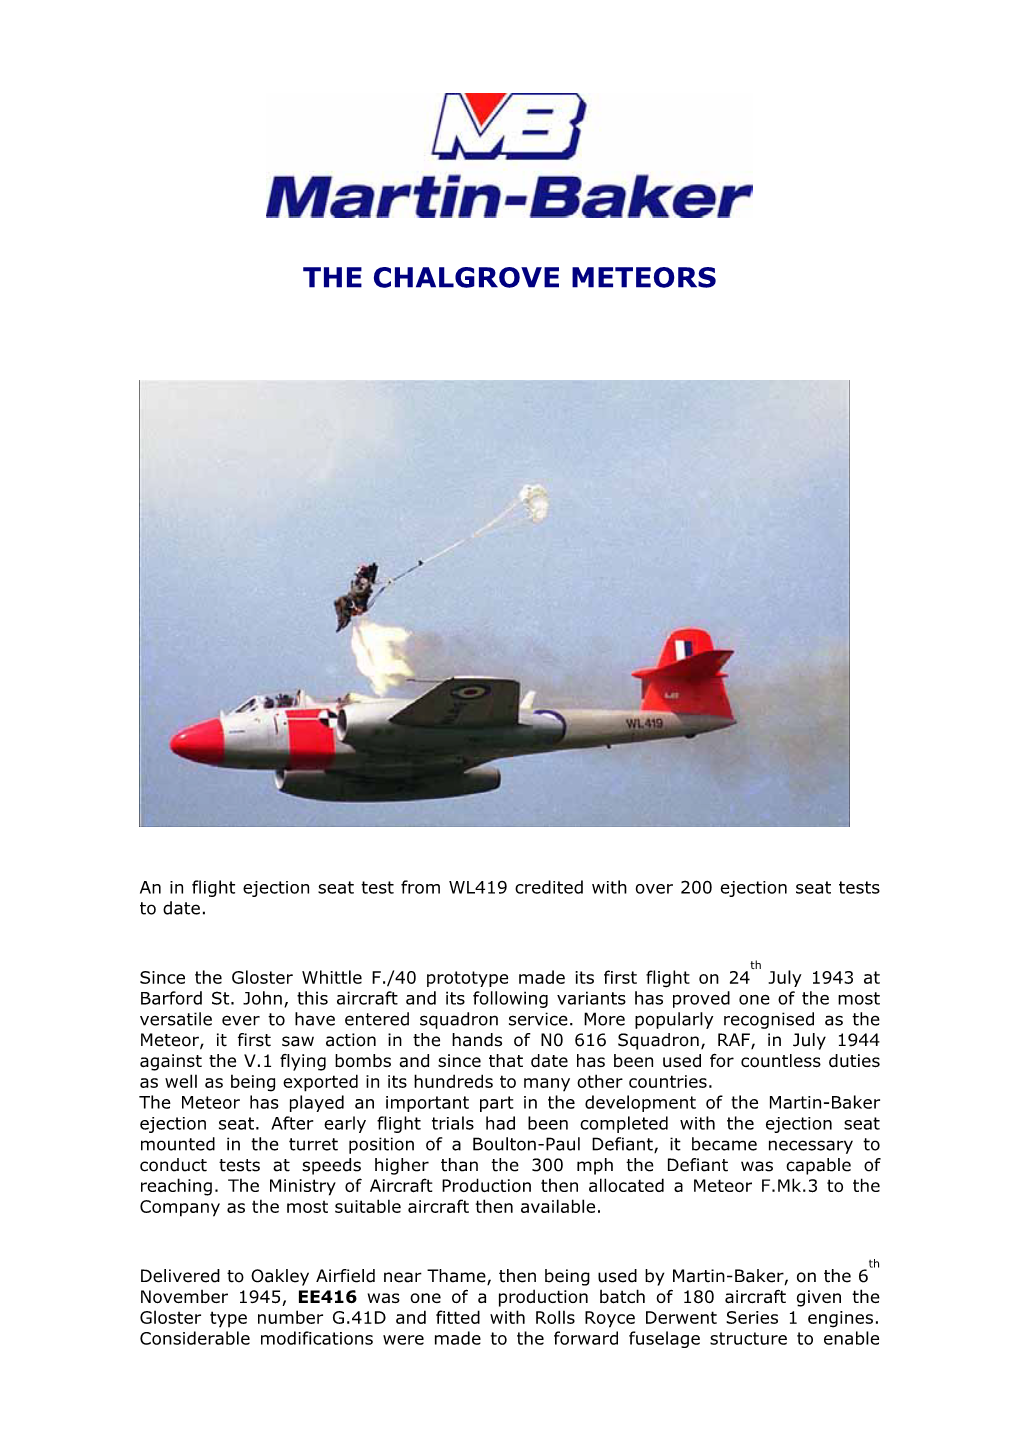 The Chalgrove Meteors